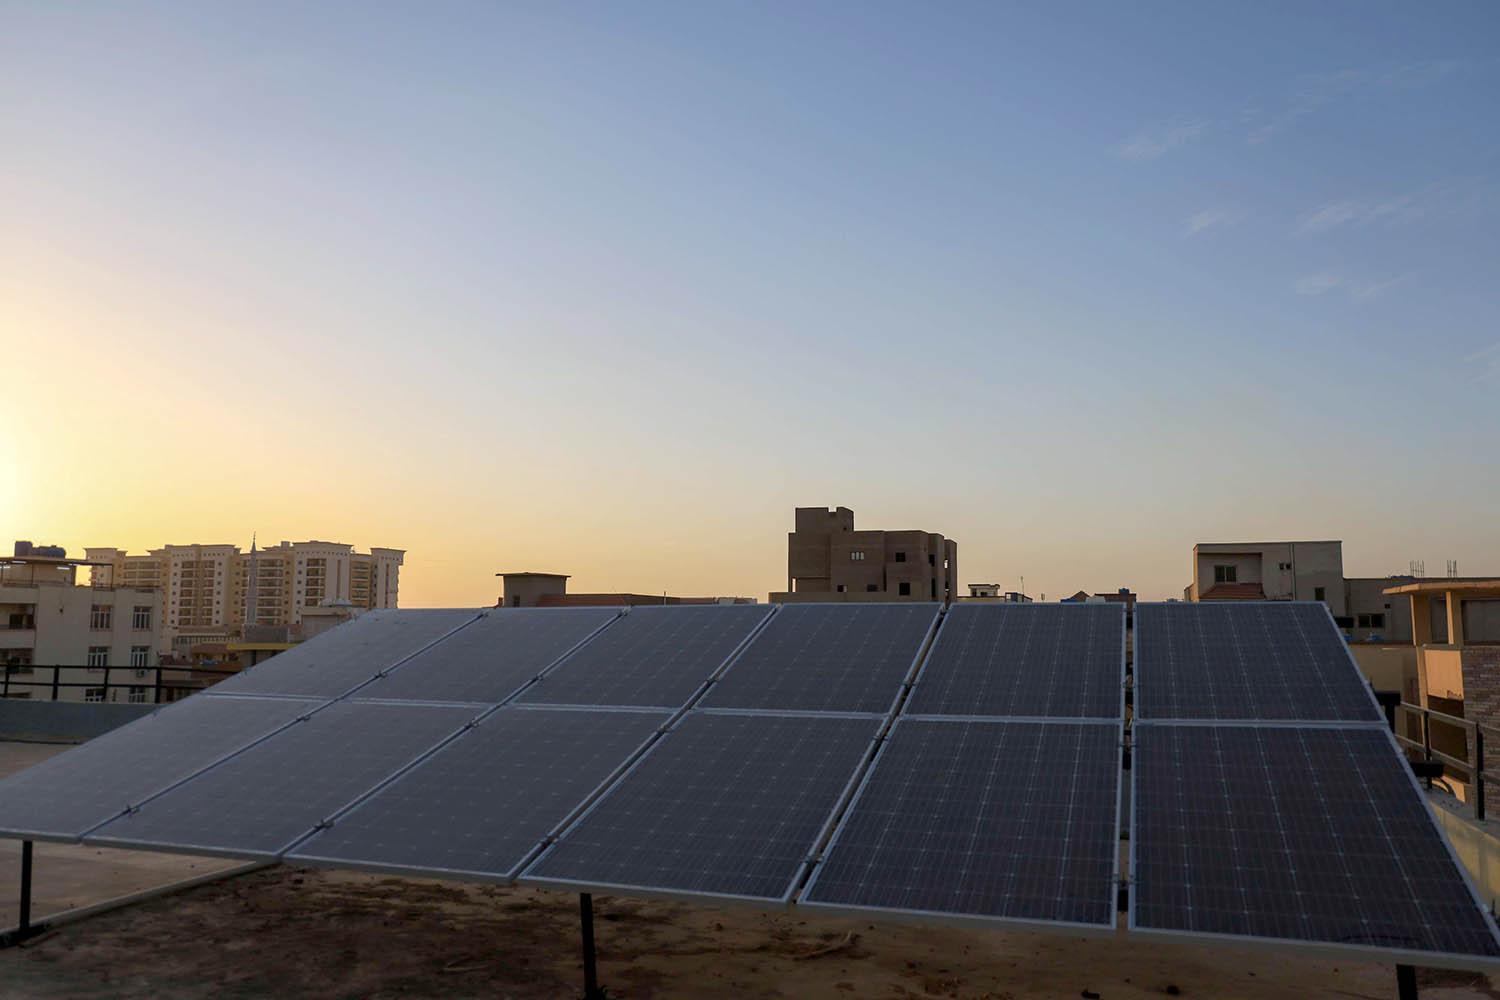 Sudan is an important emerging market for solar energy